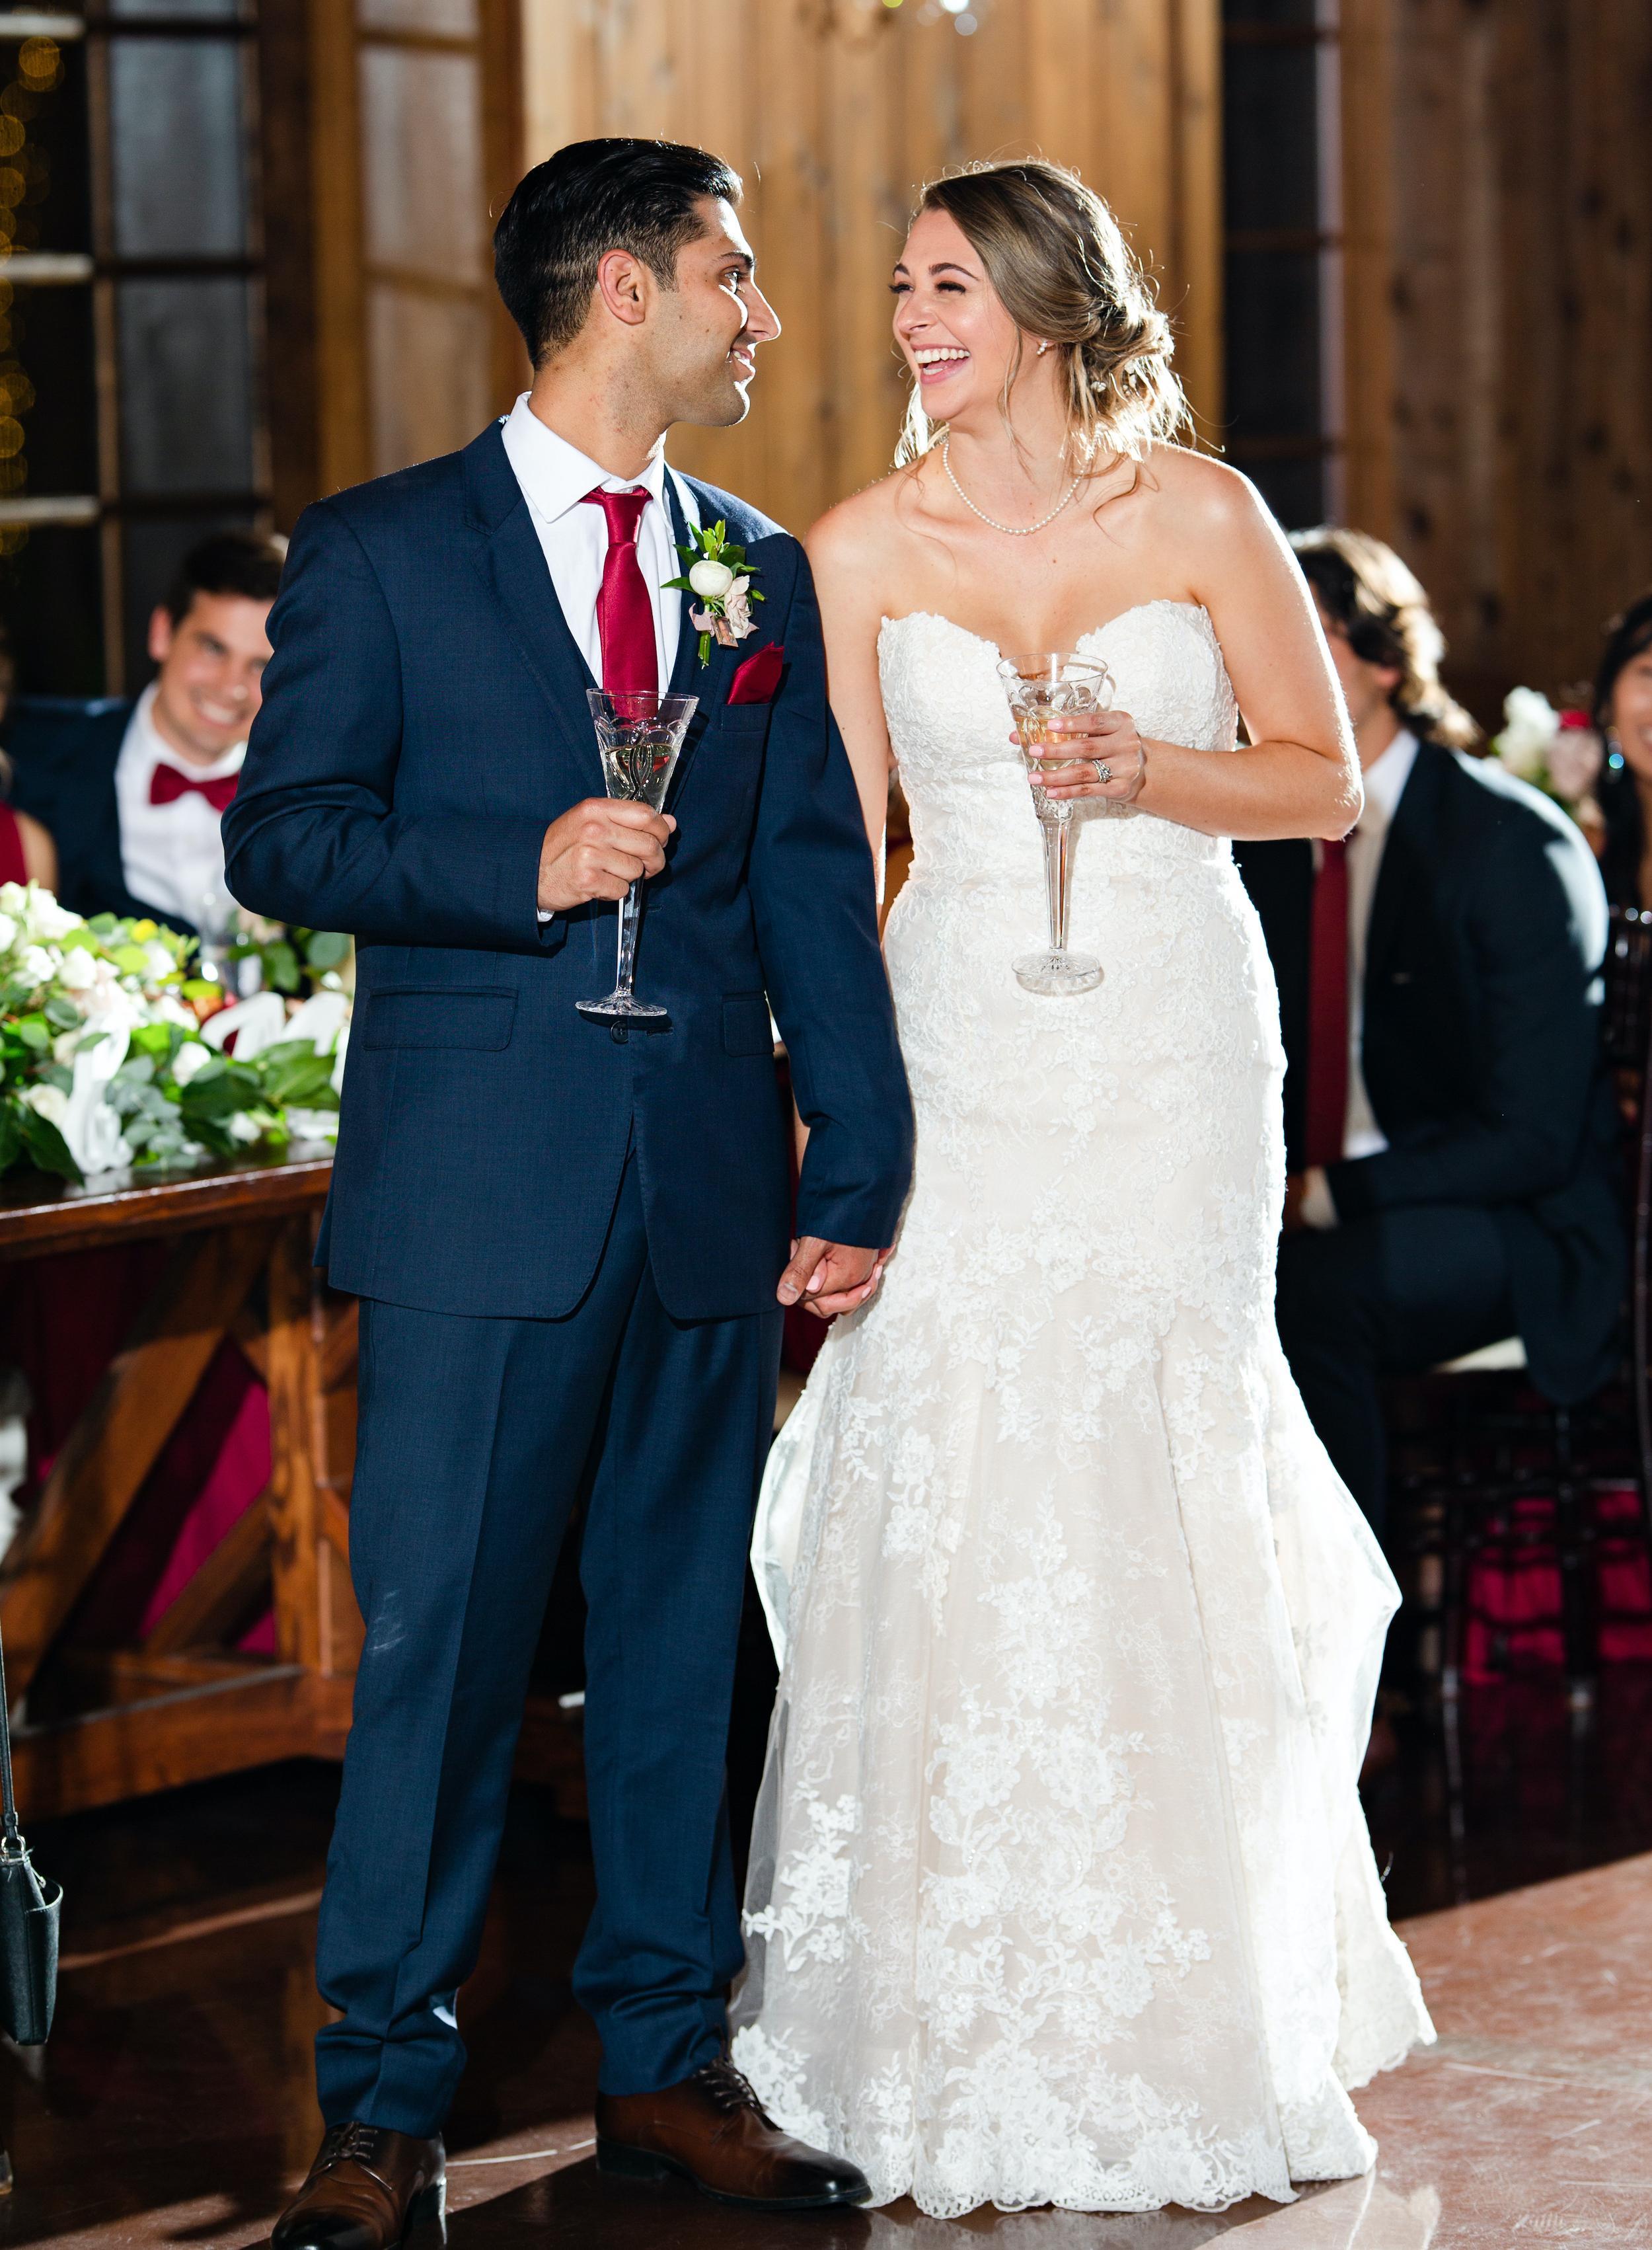 The bride and groom smile at each other at their reception while holding champagne glasses.